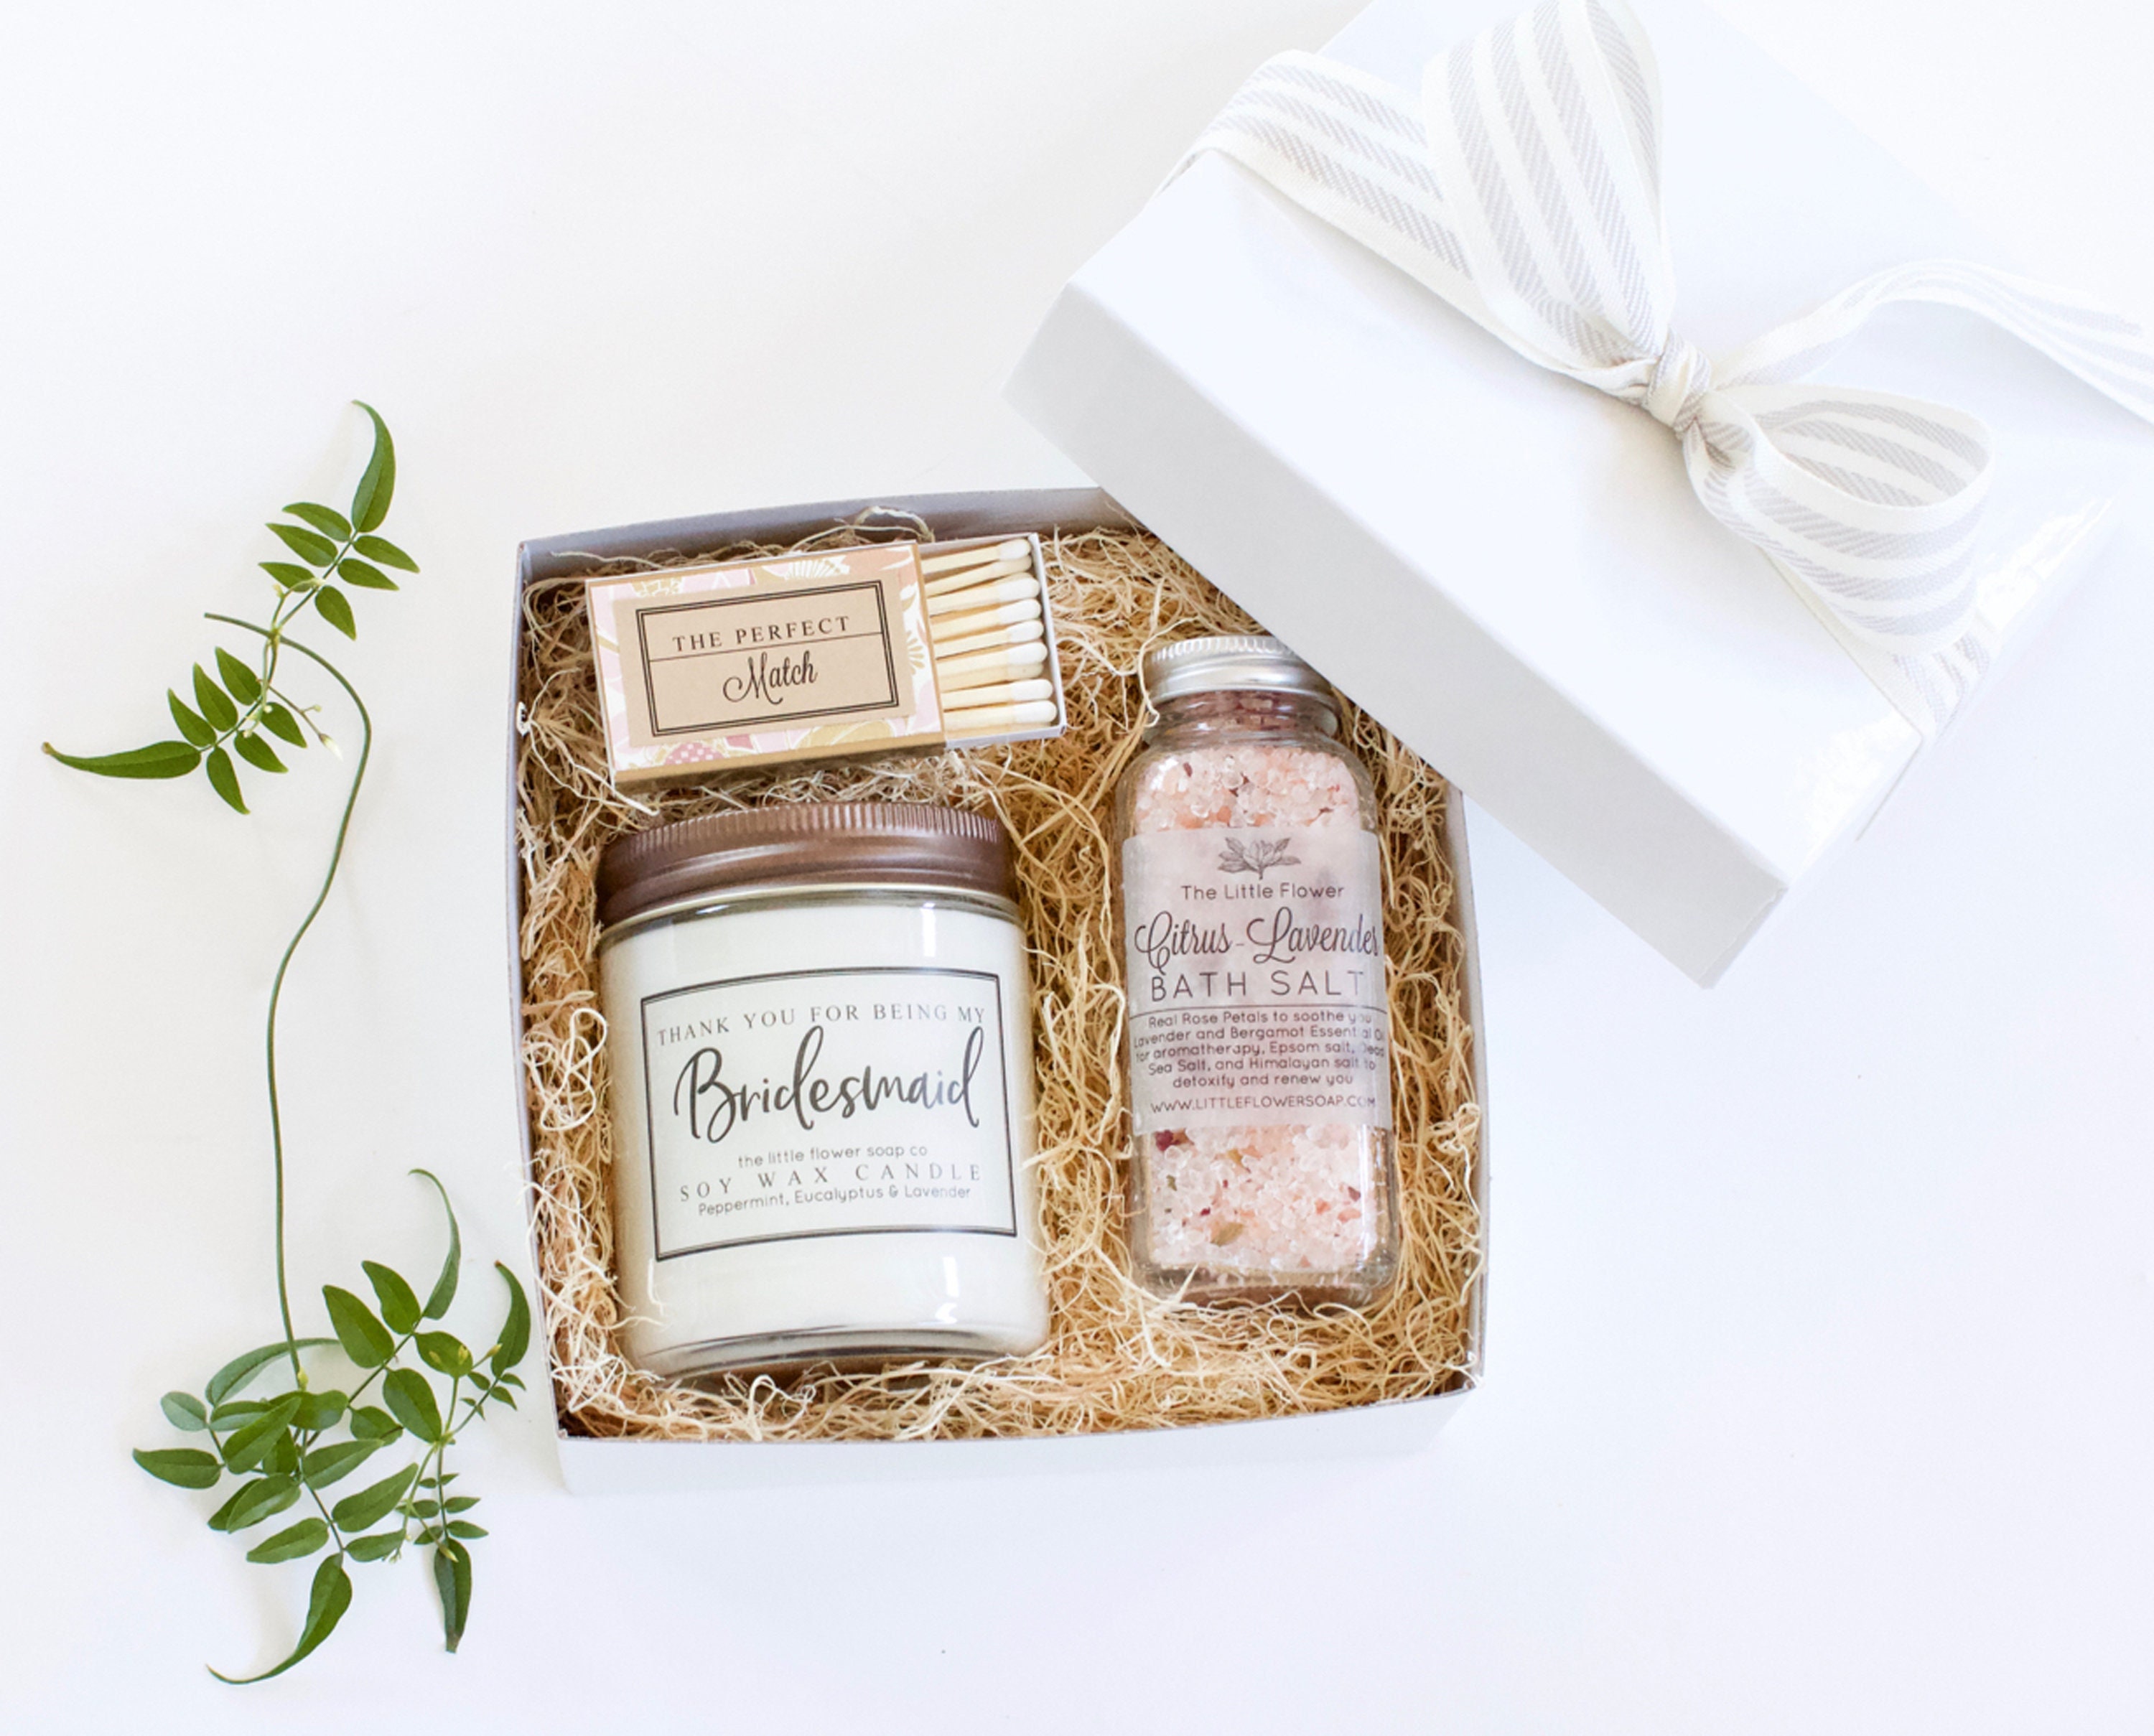 15 Great Engagement Gifts Boxes for Him & Her - Bridesmaid Gifts Boutique